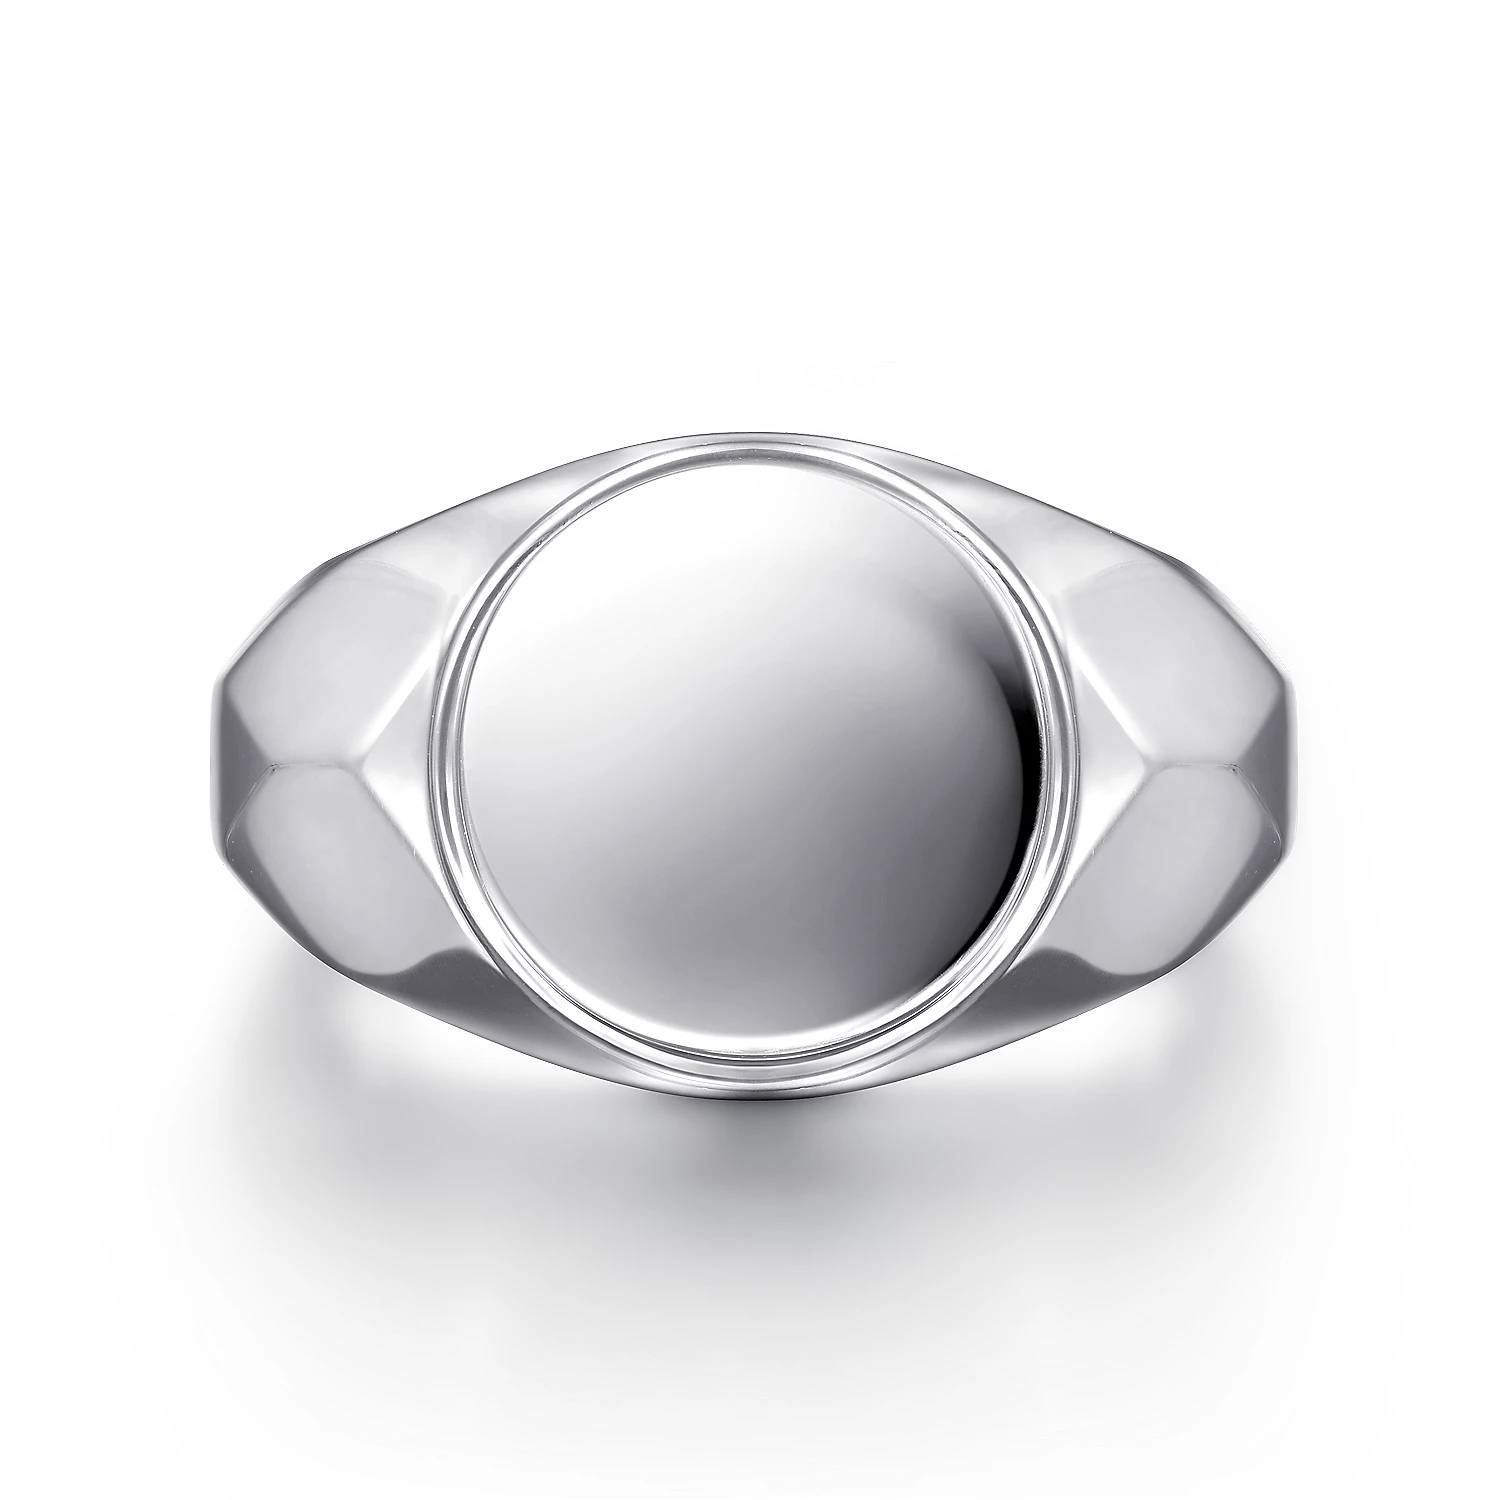 Wide 925 Sterling Silver Round Signet Ring